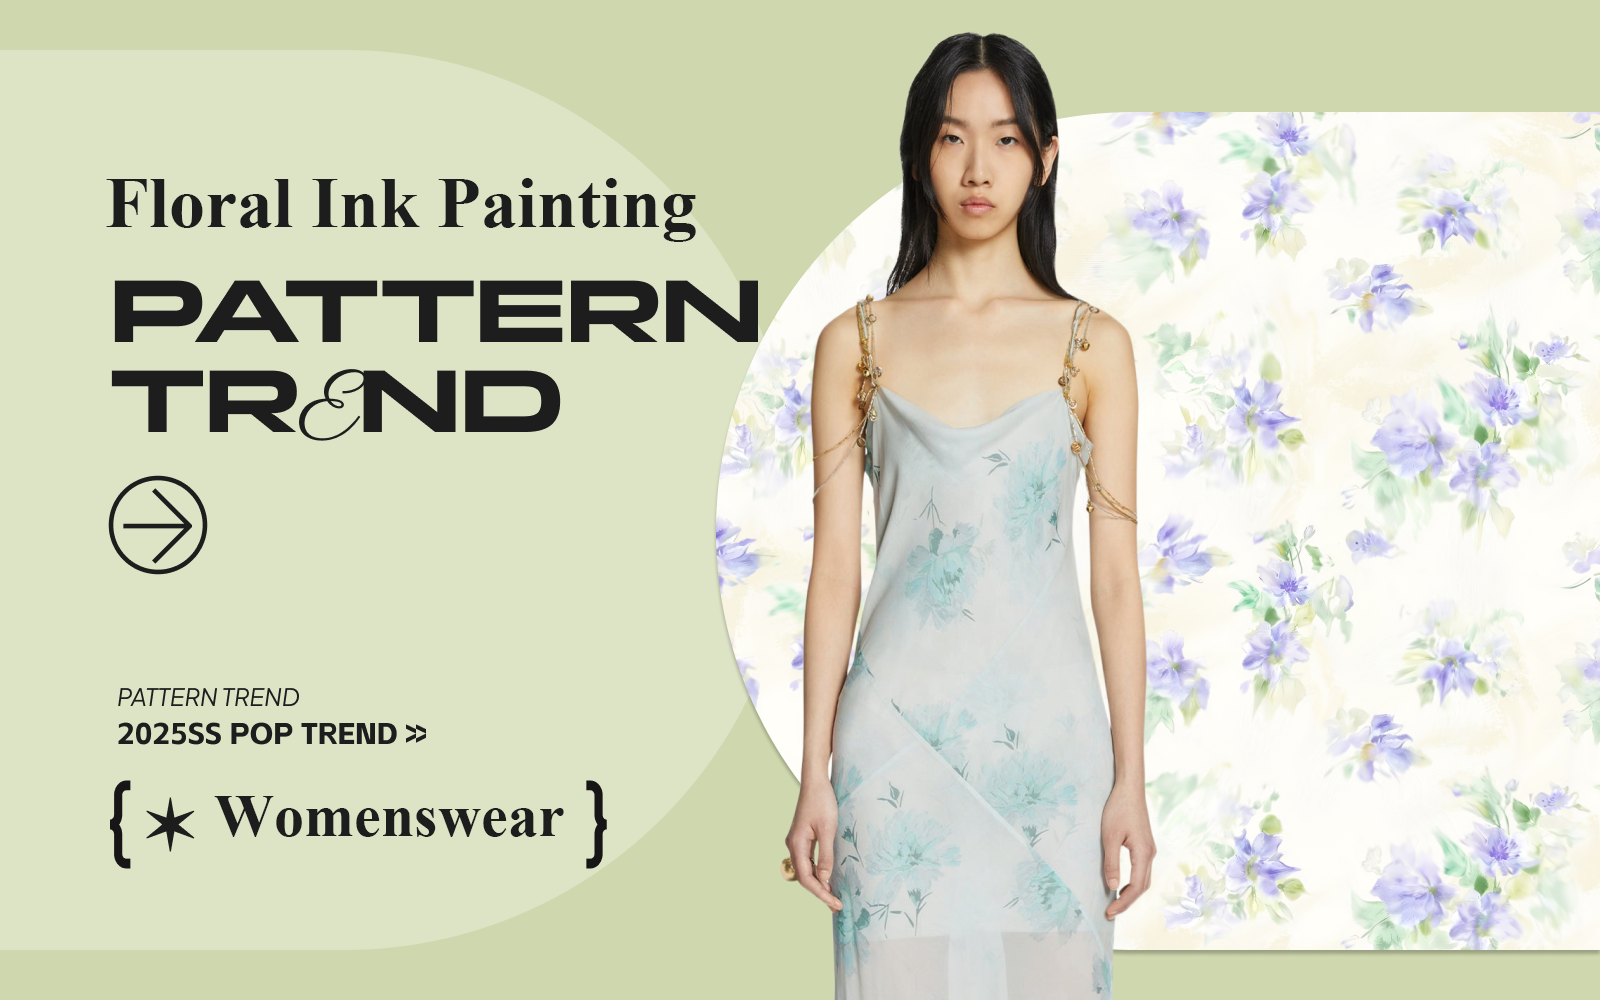 Floral Ink Painting -- The Pattern Trend for Womenswear